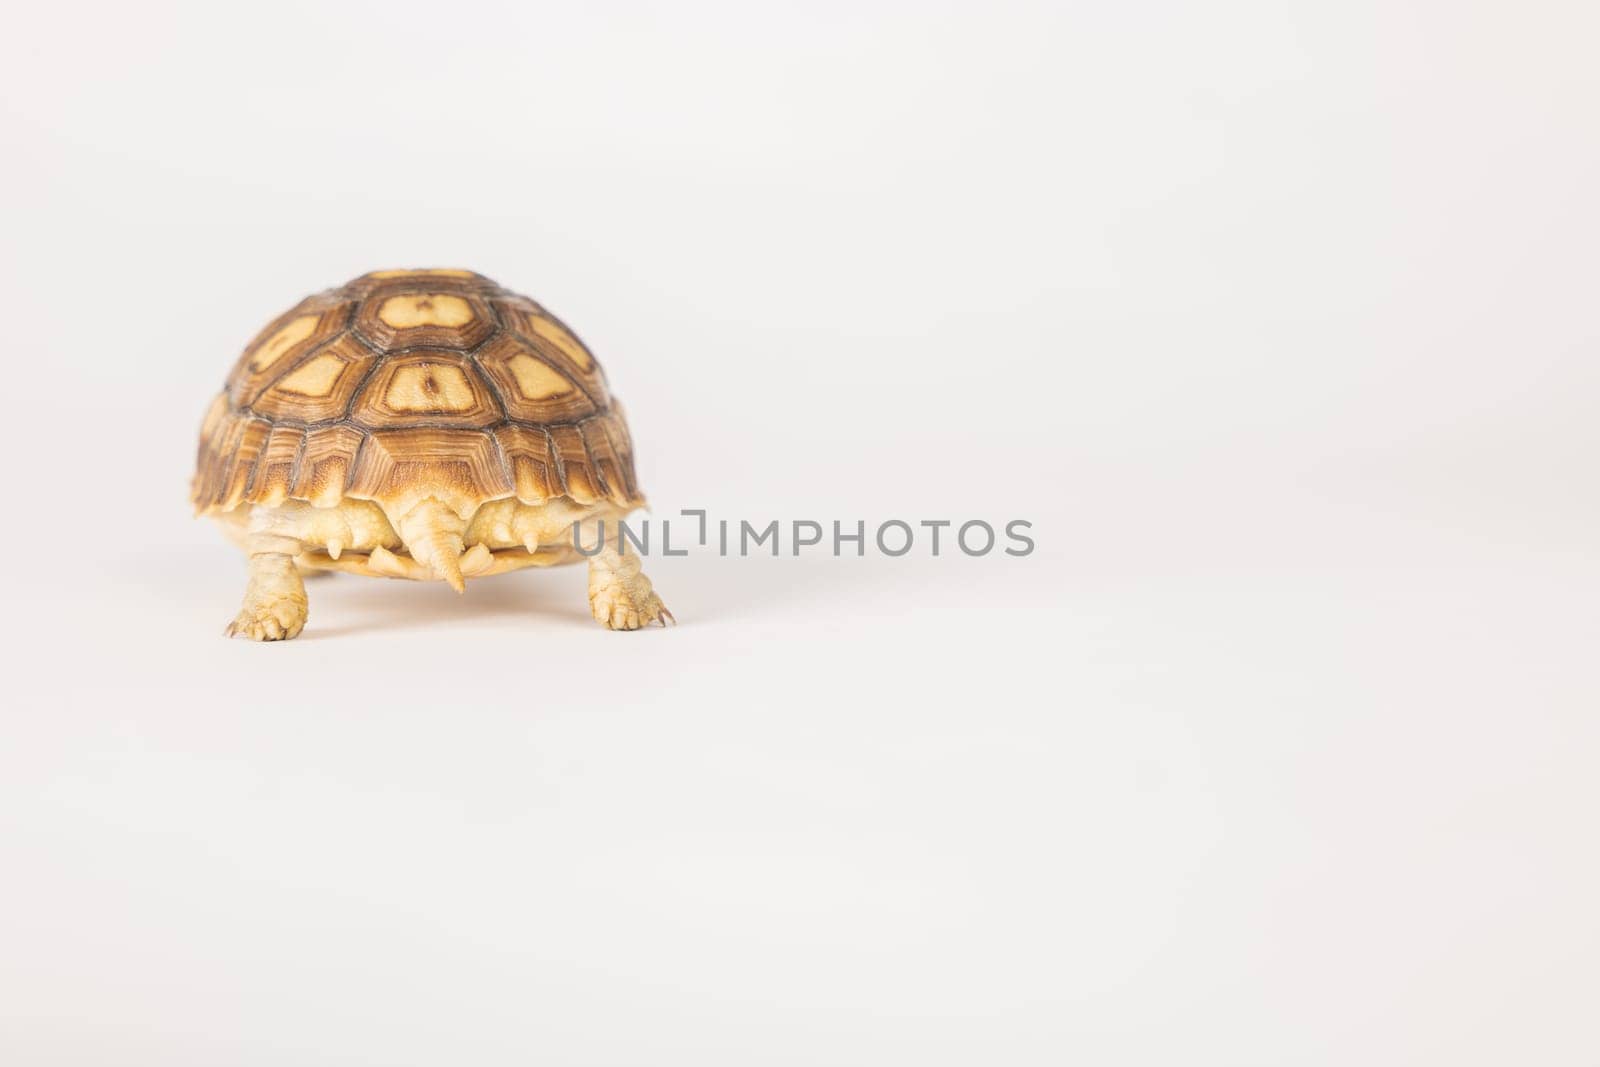 Meet the sulcata tortoise, a patient and cute African reptile, in this isolated portrait against a white background. Its unique pattern and design make it a true beauty in the world of amphibians.